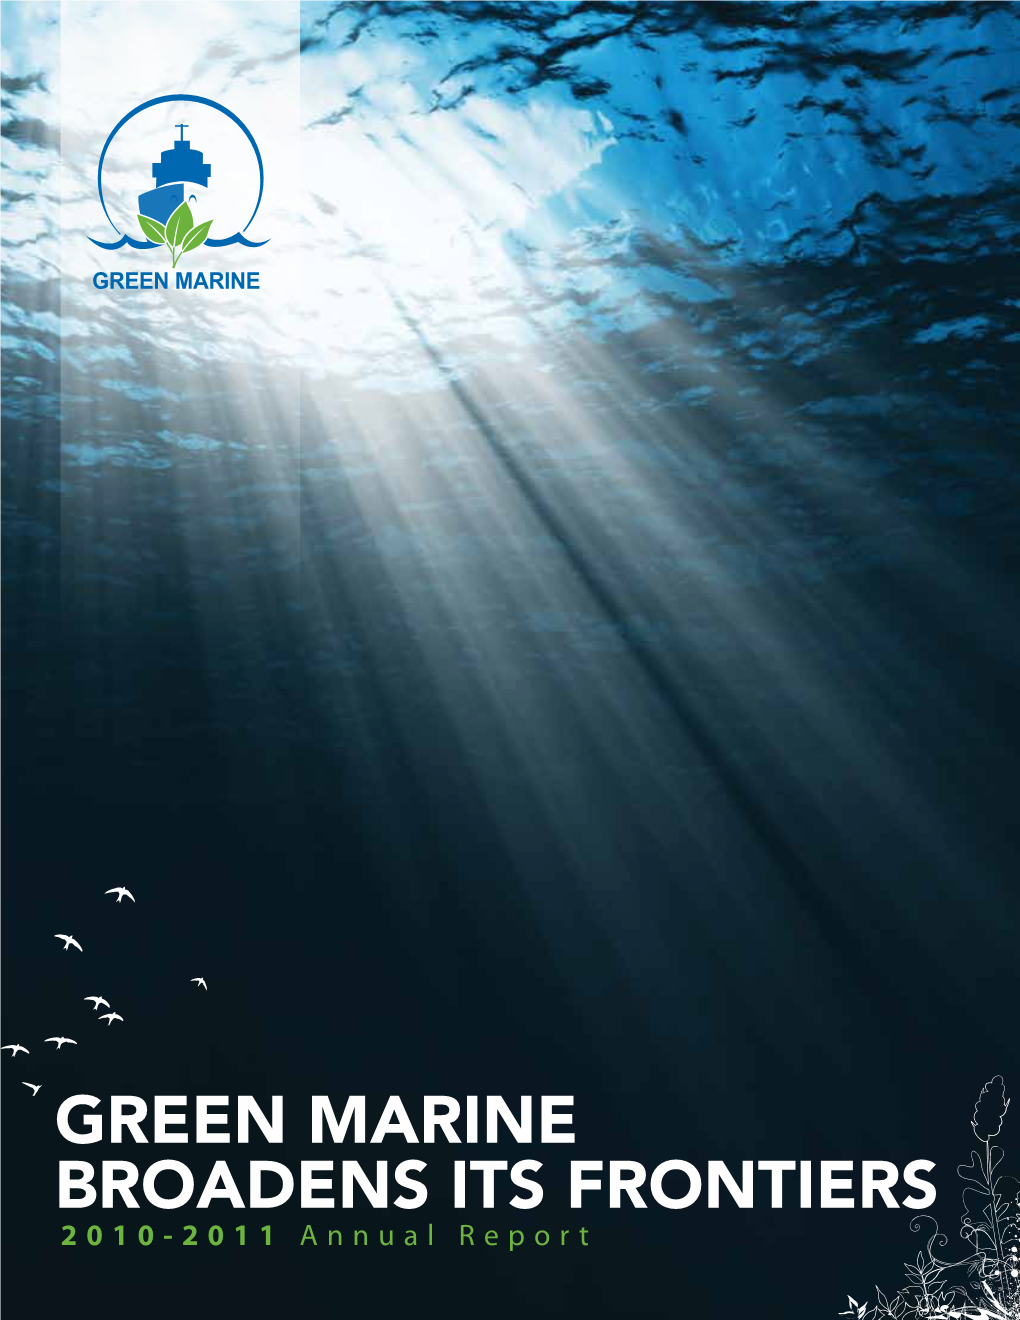 GREEN MARINE BROADENS ITS FRONTIERS 2010-2011 Annual Report